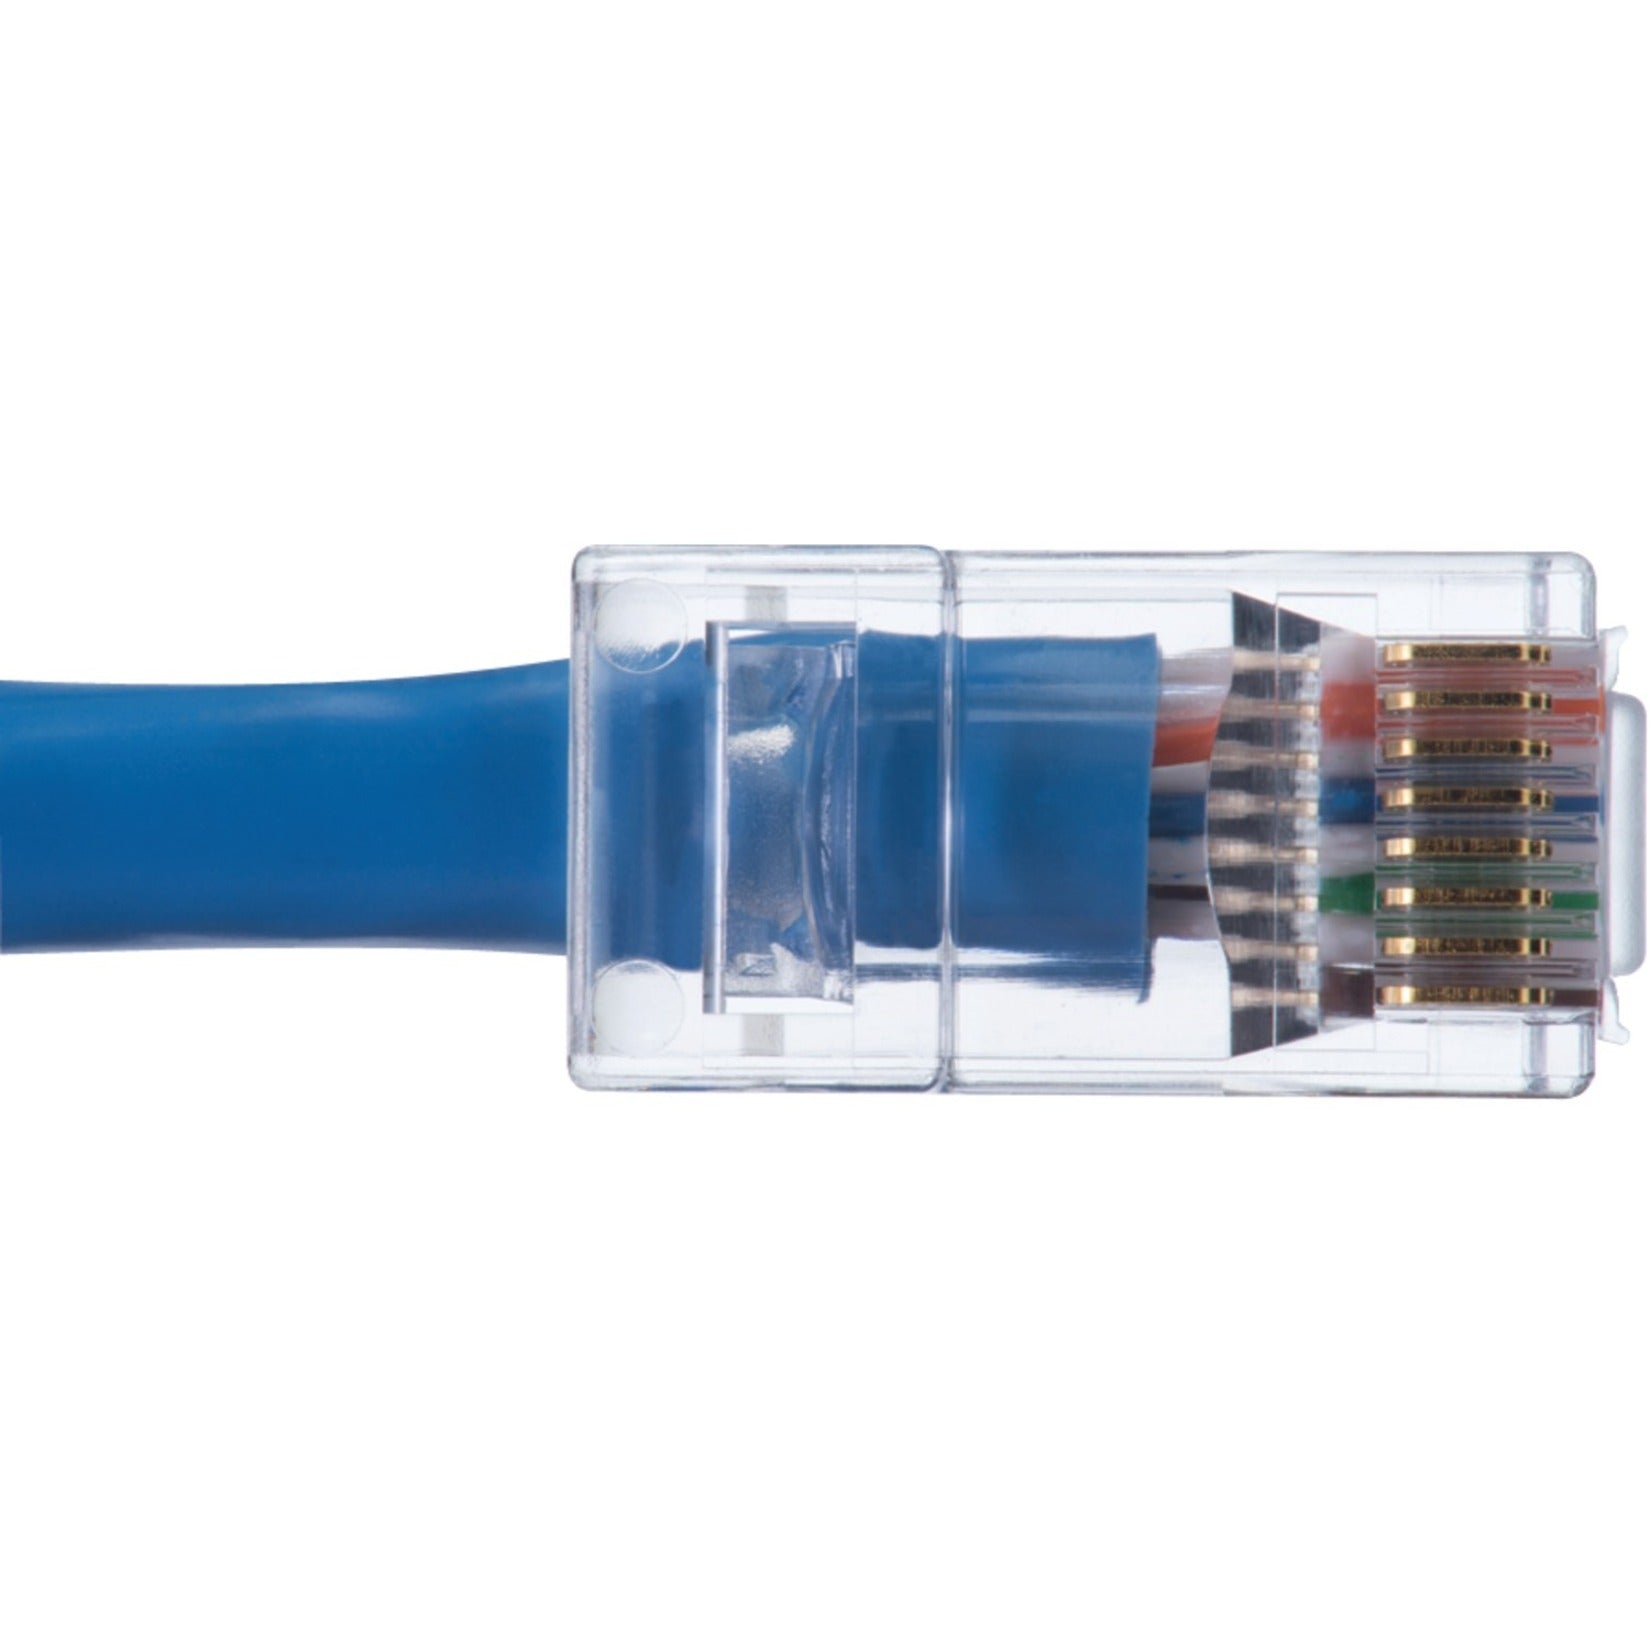 IDEAL 85-377 CAT6 Feed-Thru RJ-45 Modular Plugs 100/Bag, Network Connector with Strain Relief